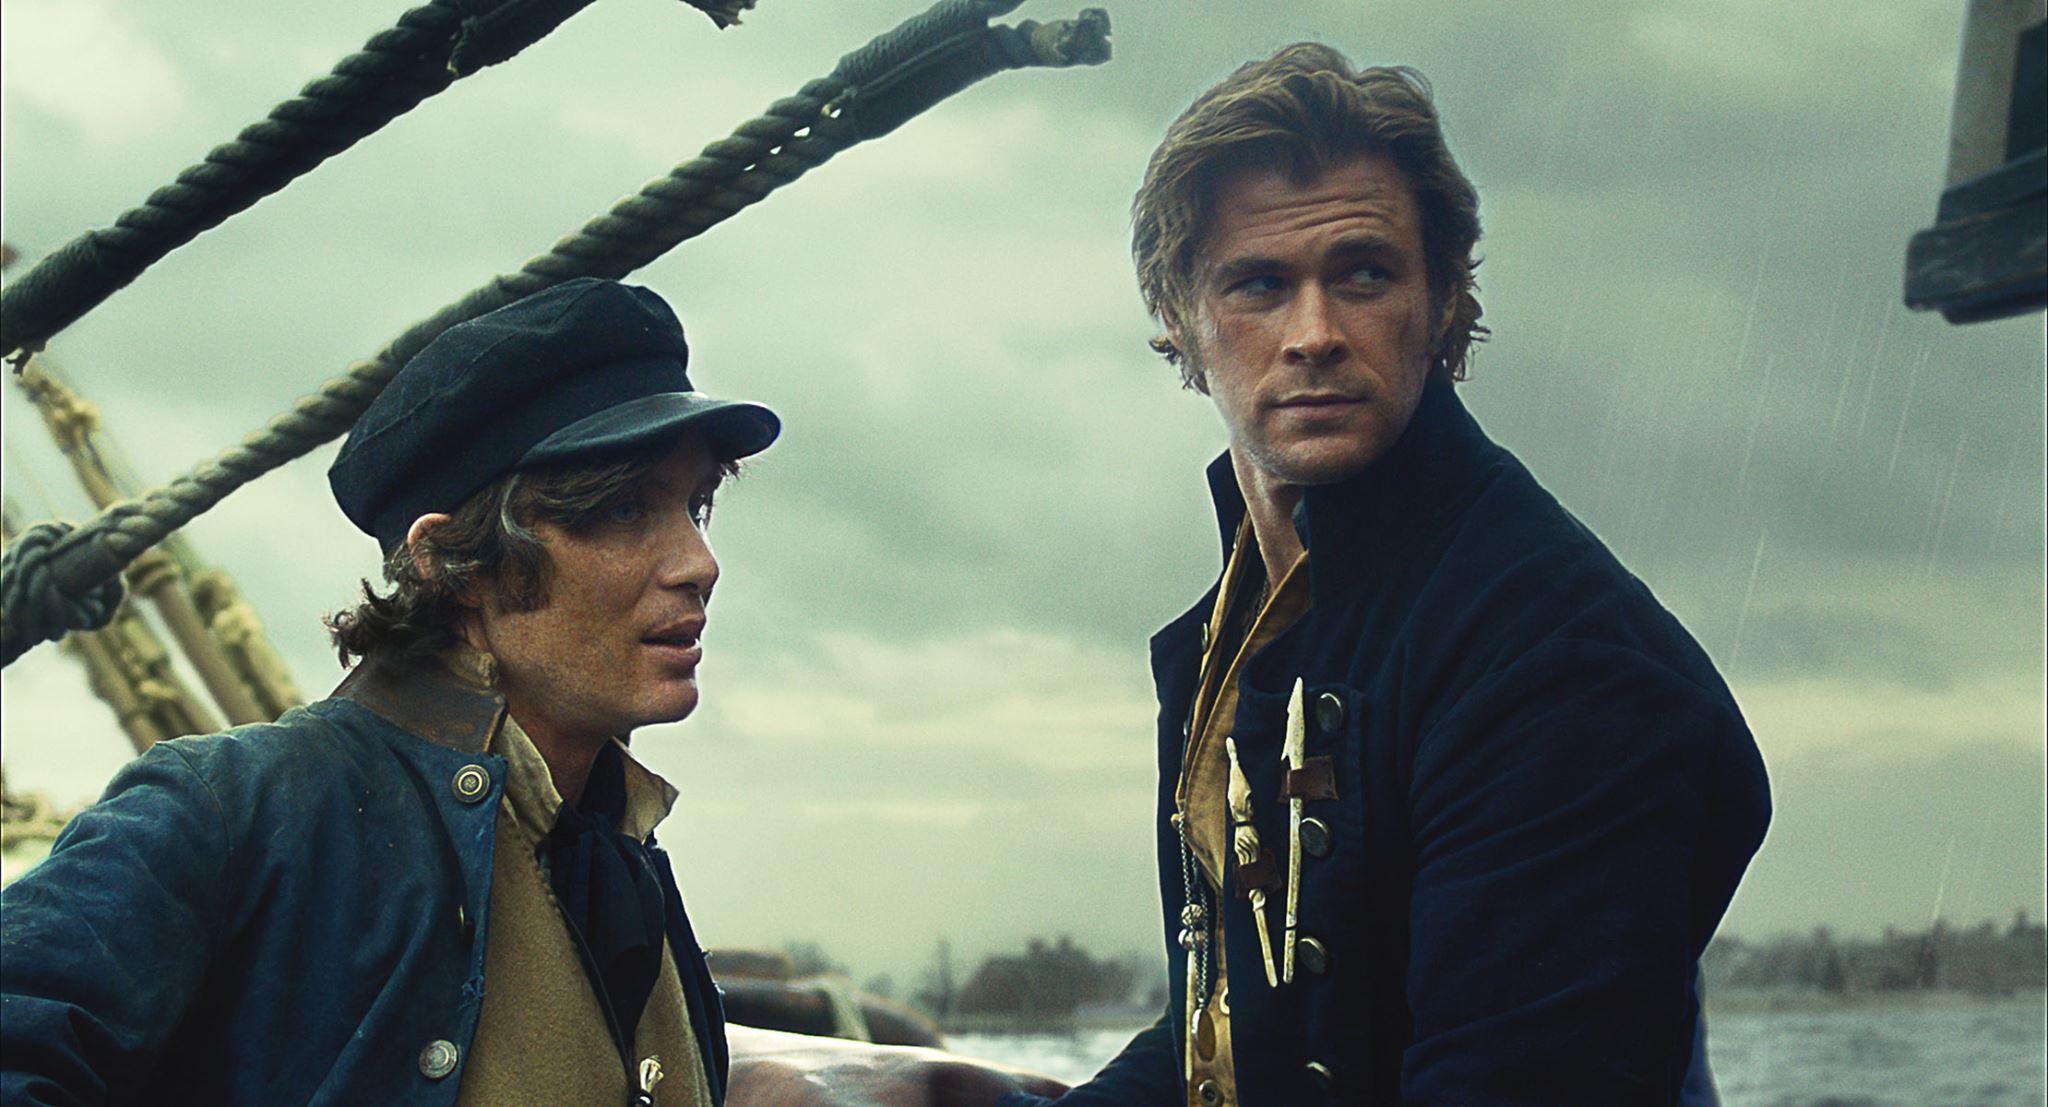 facebook.com“In the Heart of the Sea” earned $11 million it’s opening weekend.